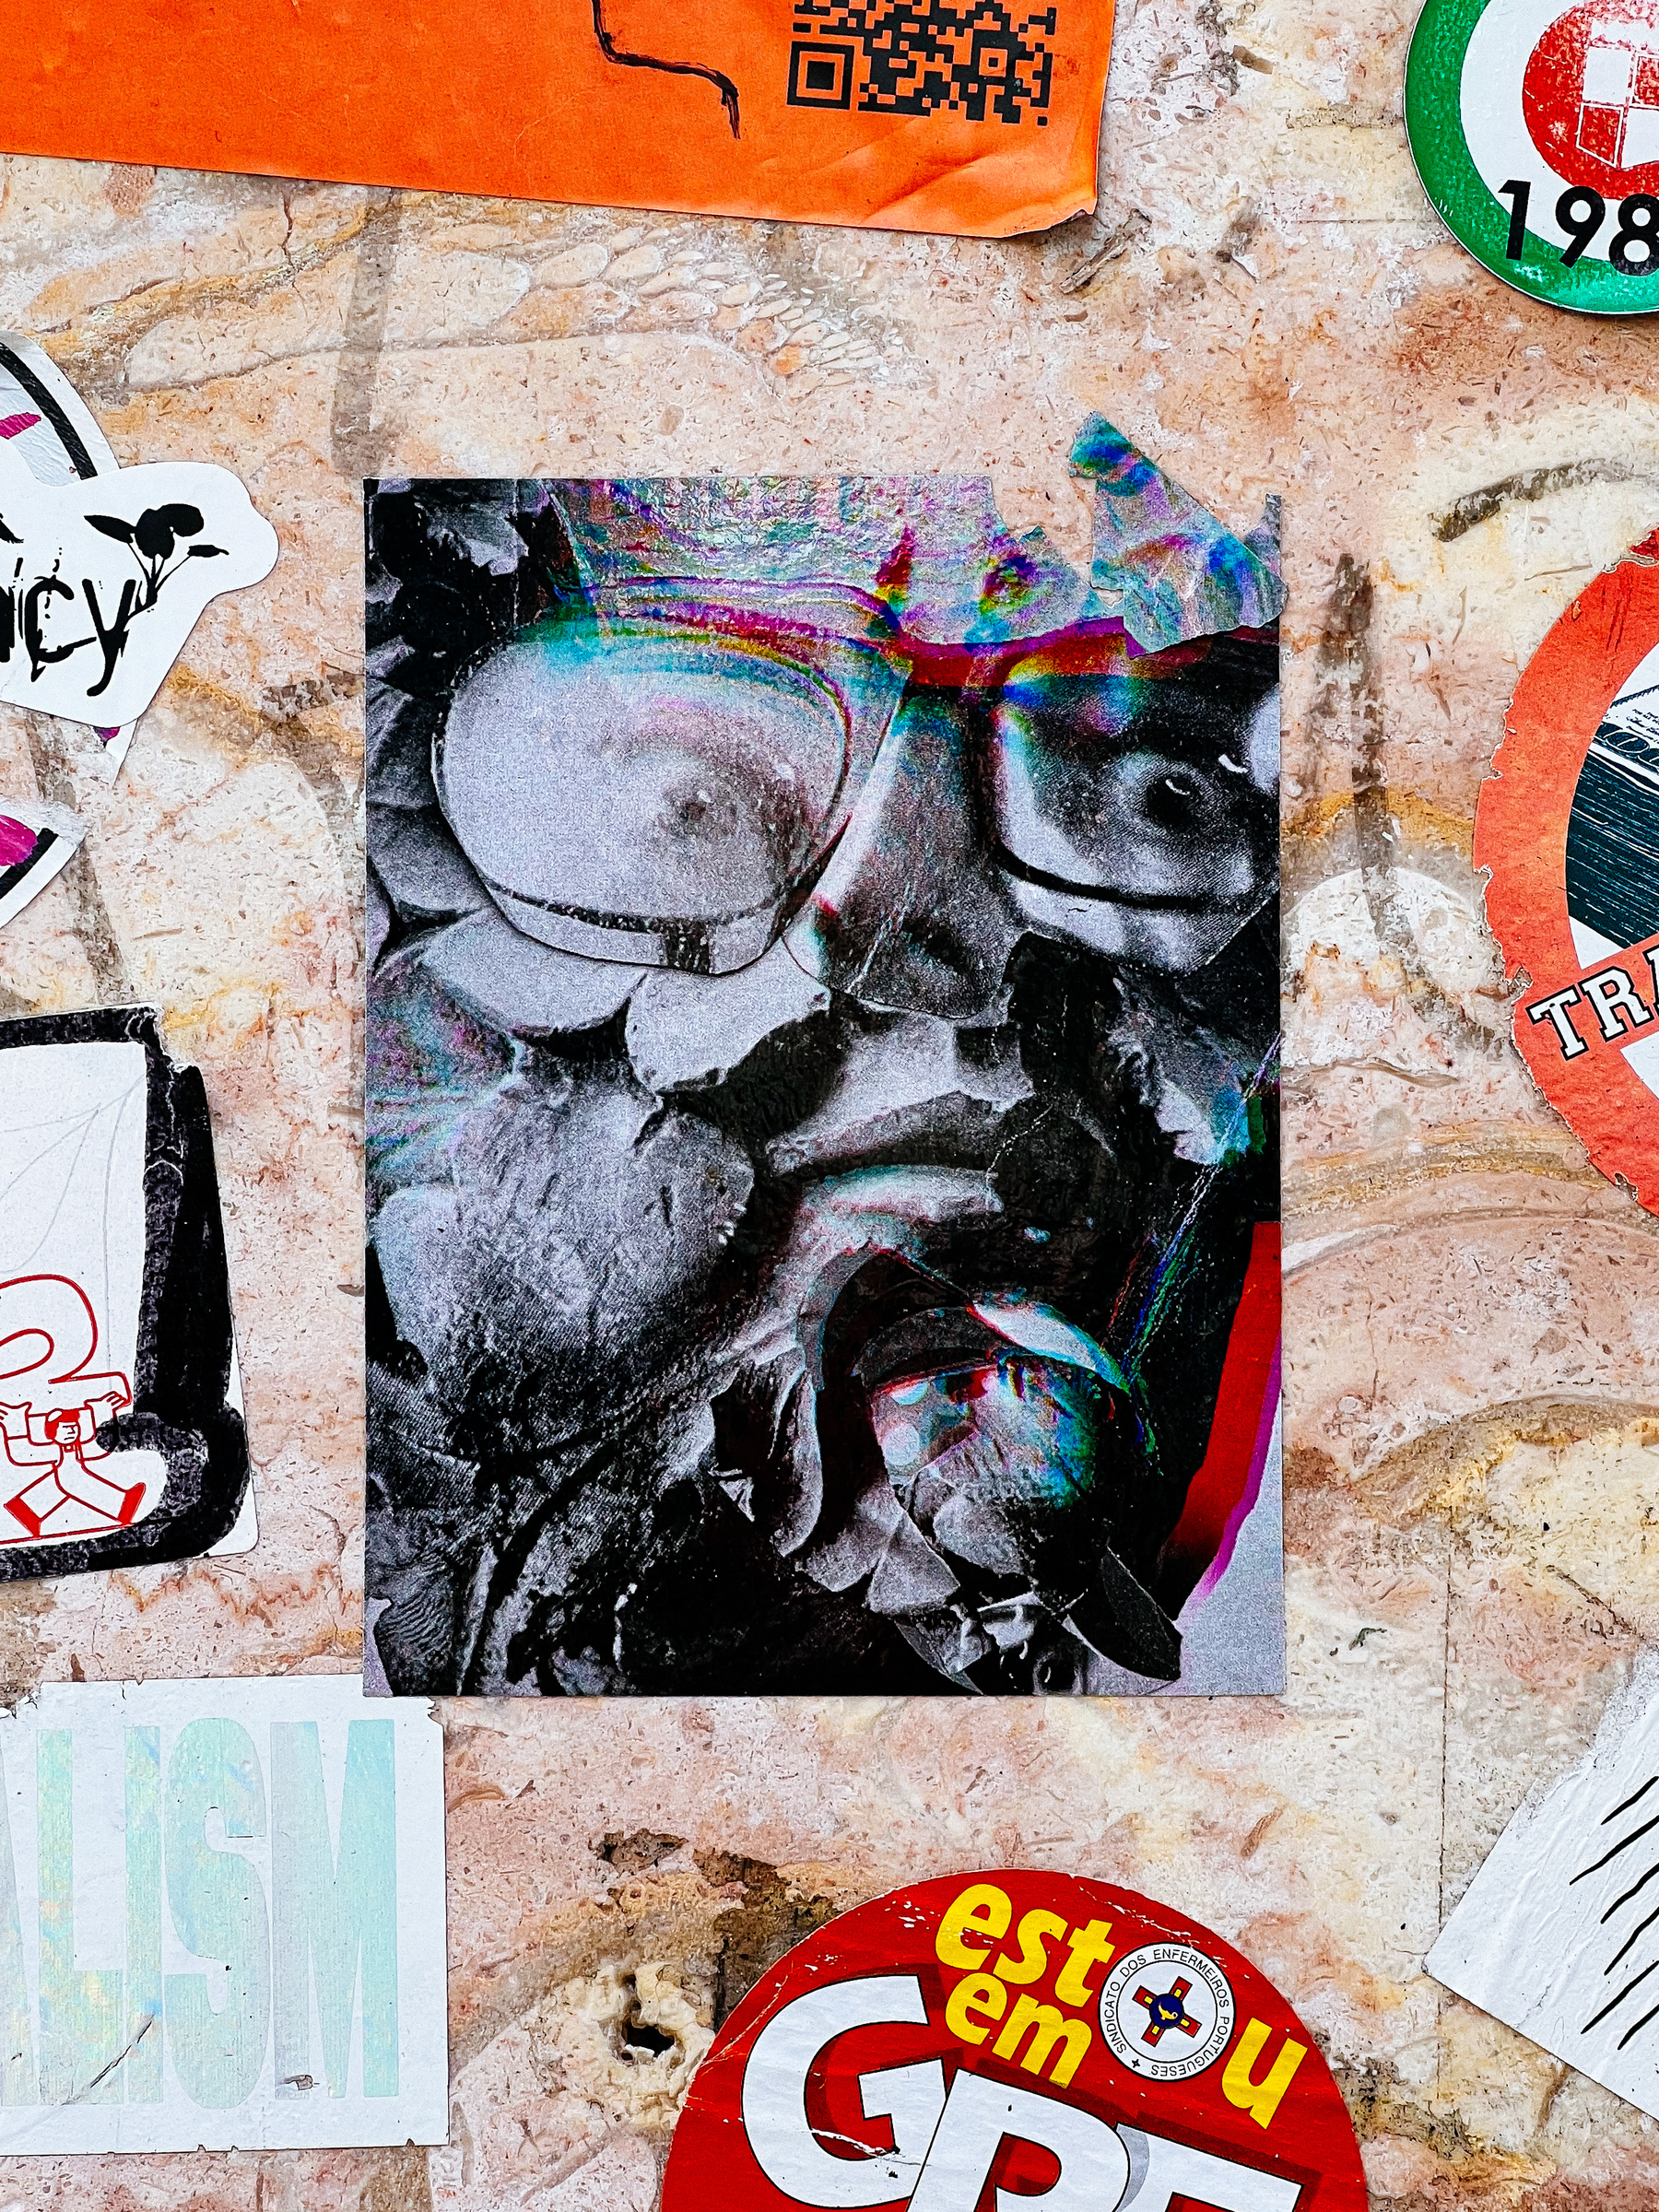 Sticker with a photo of a man with glasses, with a filter applied, making him look strange and deformed. 